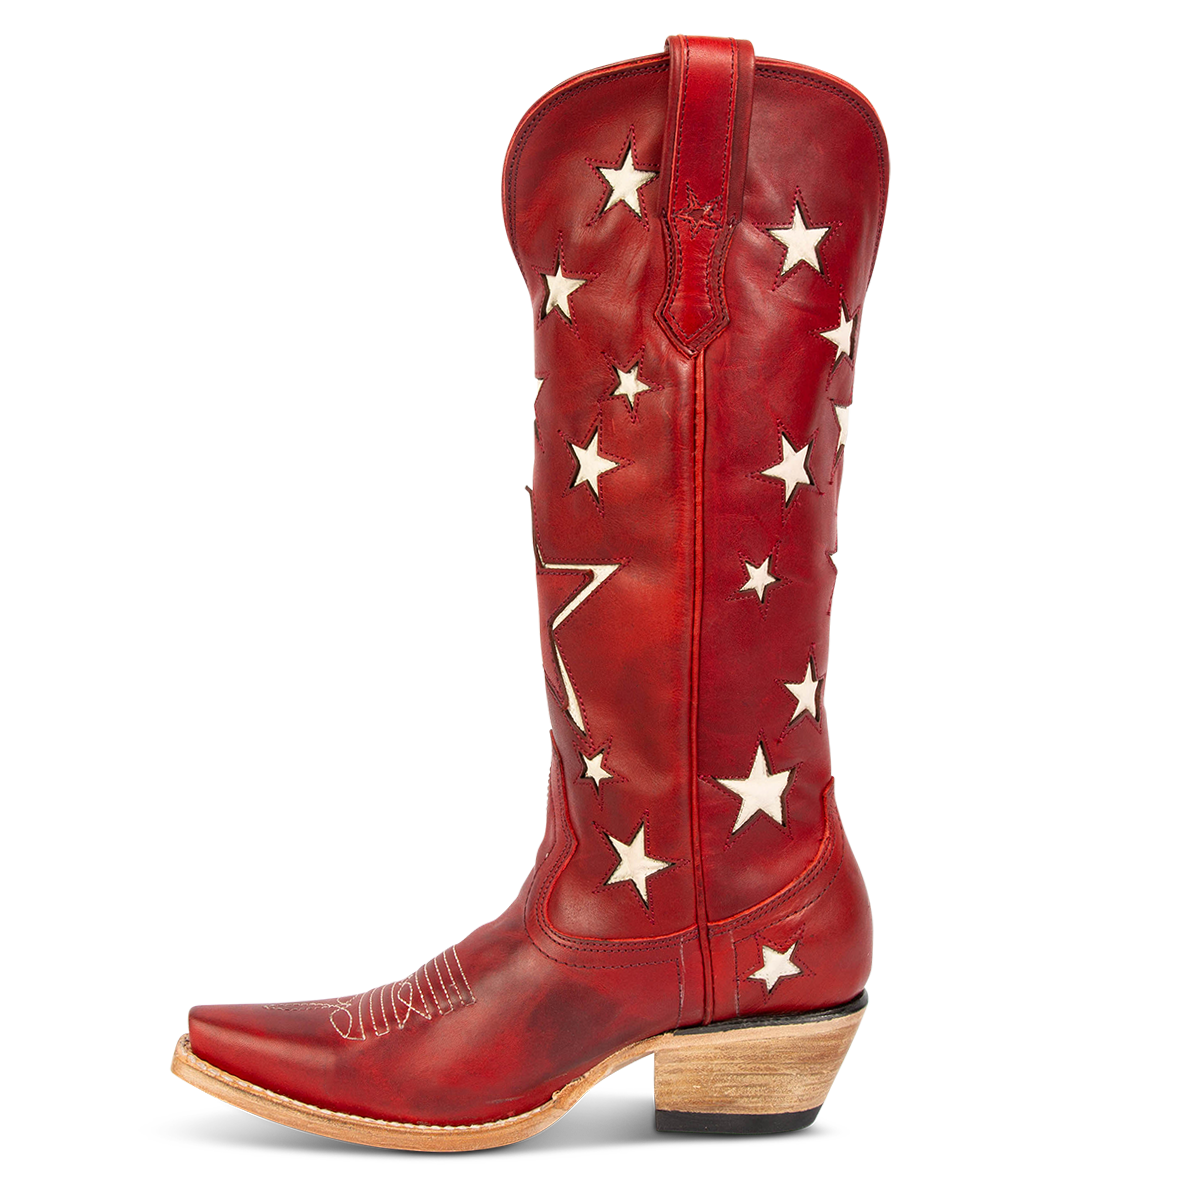 Side view showing two-toned leather and exterior pull strap on FREEBIRD women's Starzz red western boot